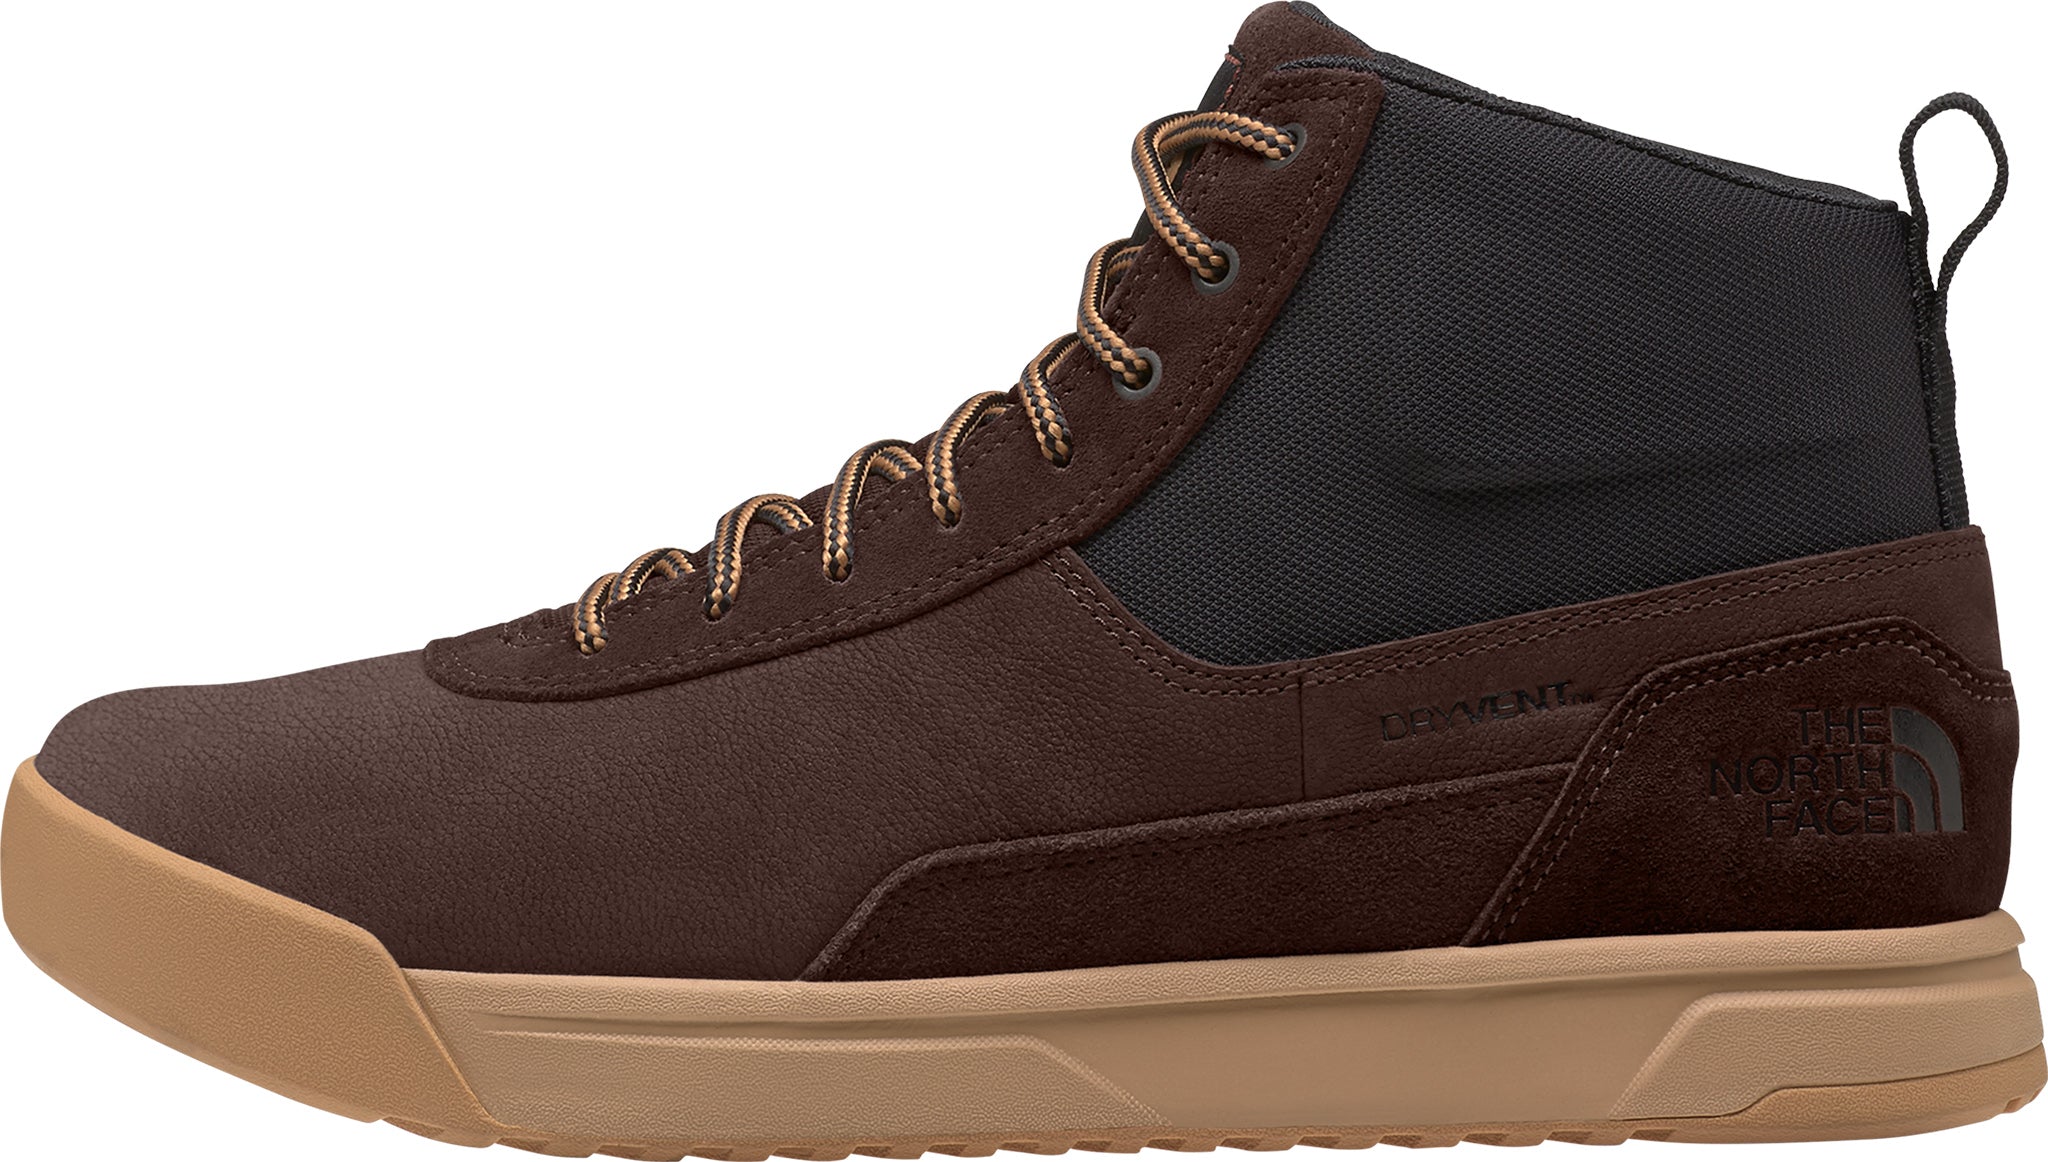 The North Face Larimer Mid Waterproof Boots - Men's